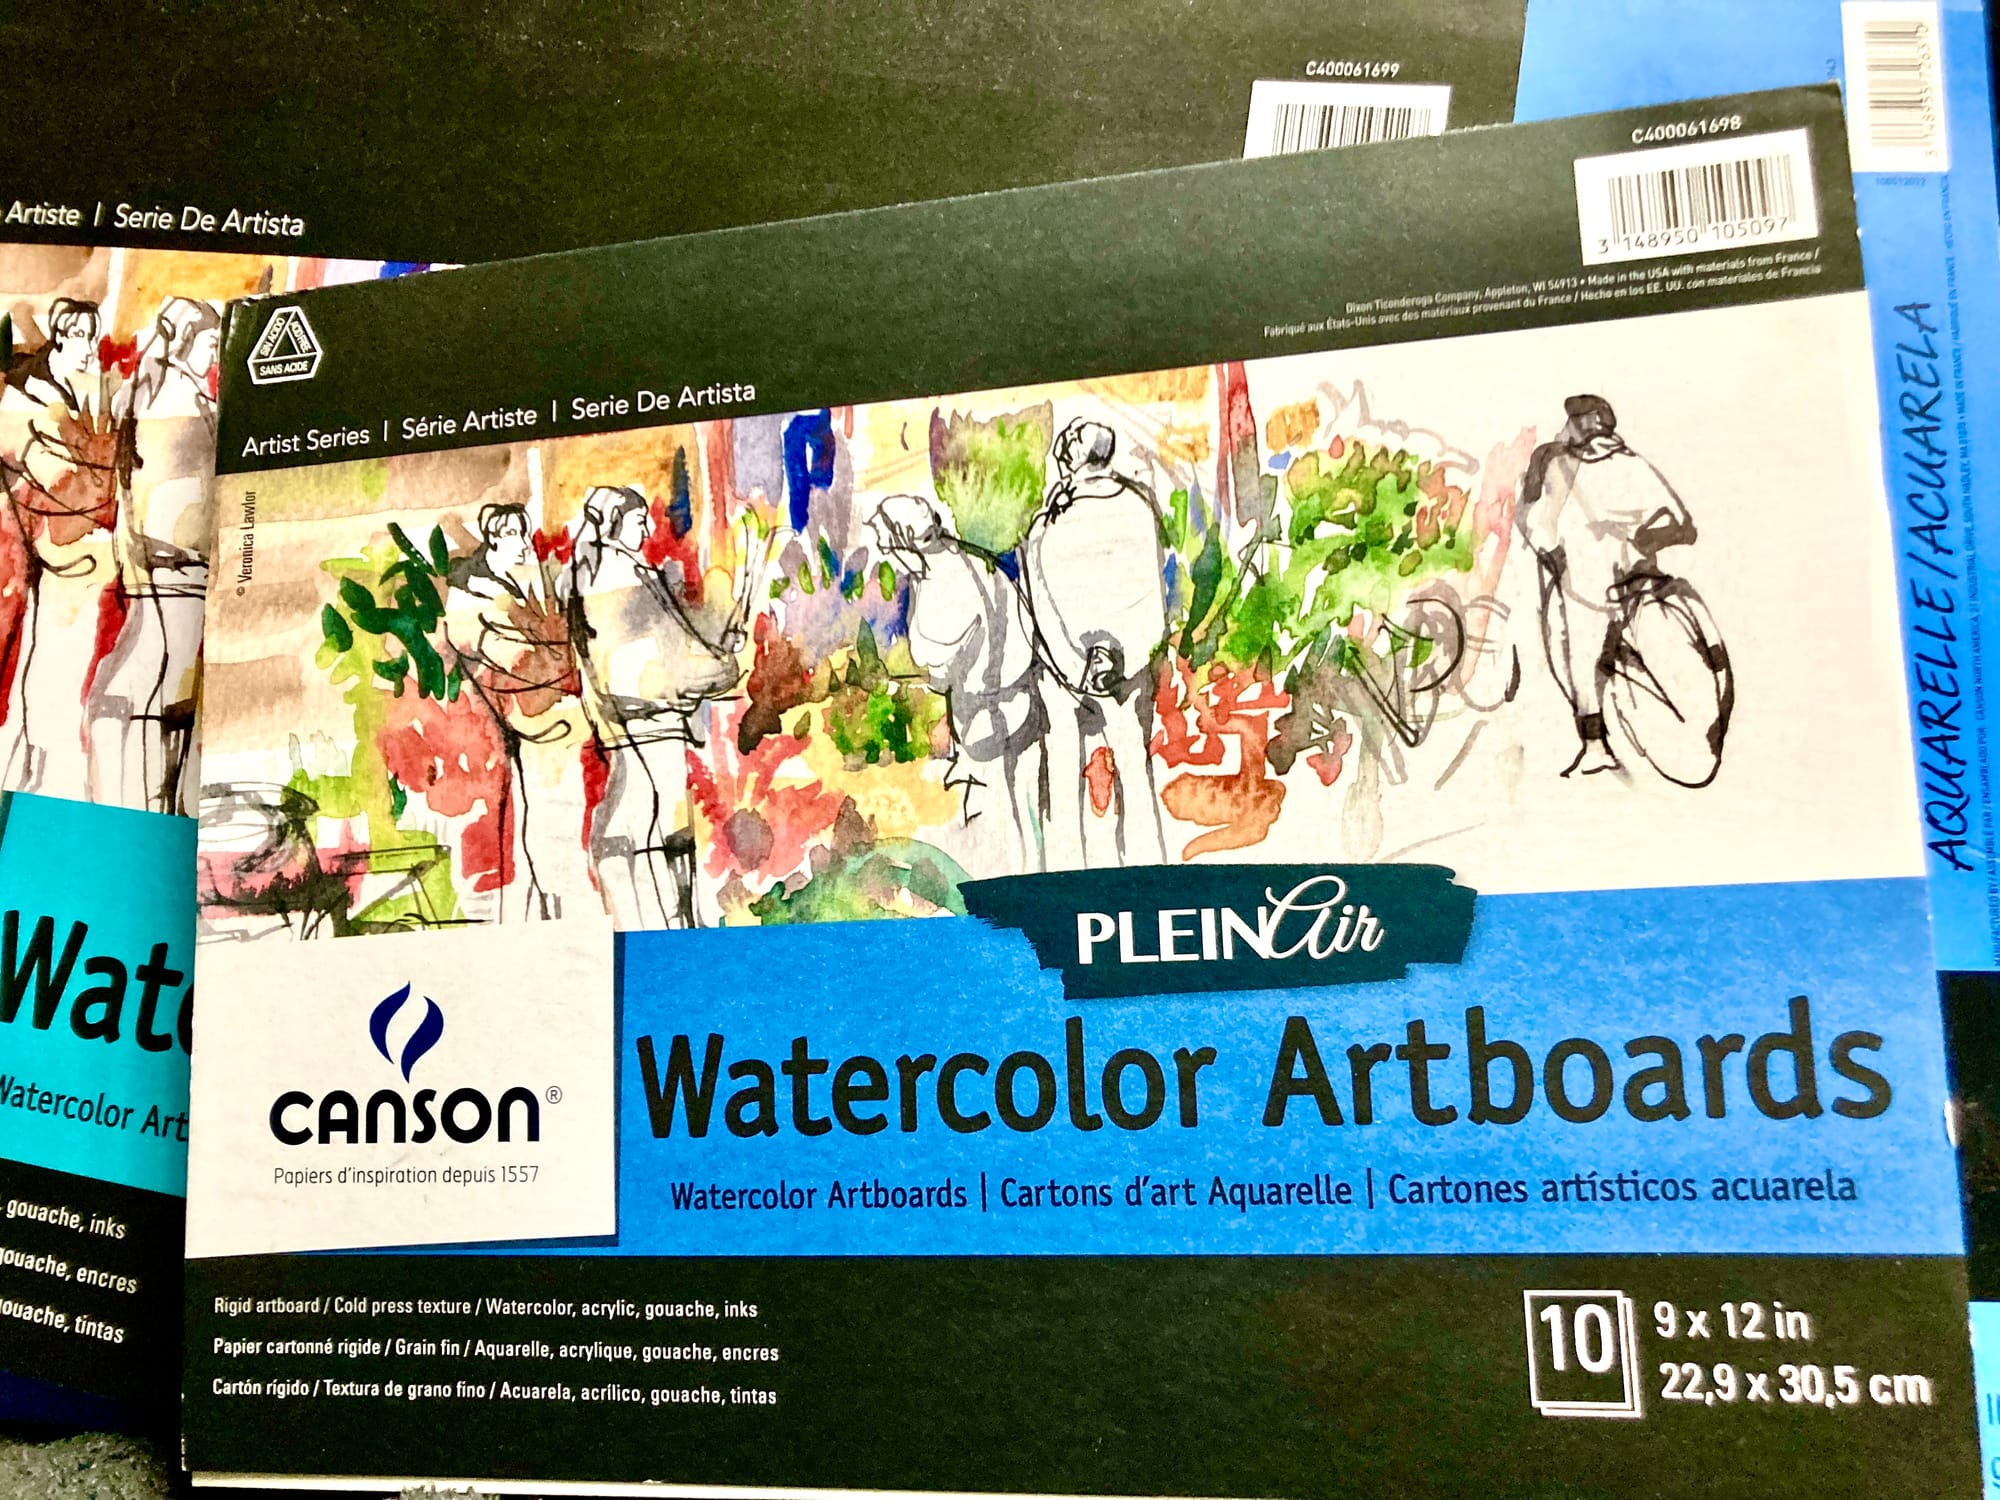 Canson watercolor art boards and watercolor paper.